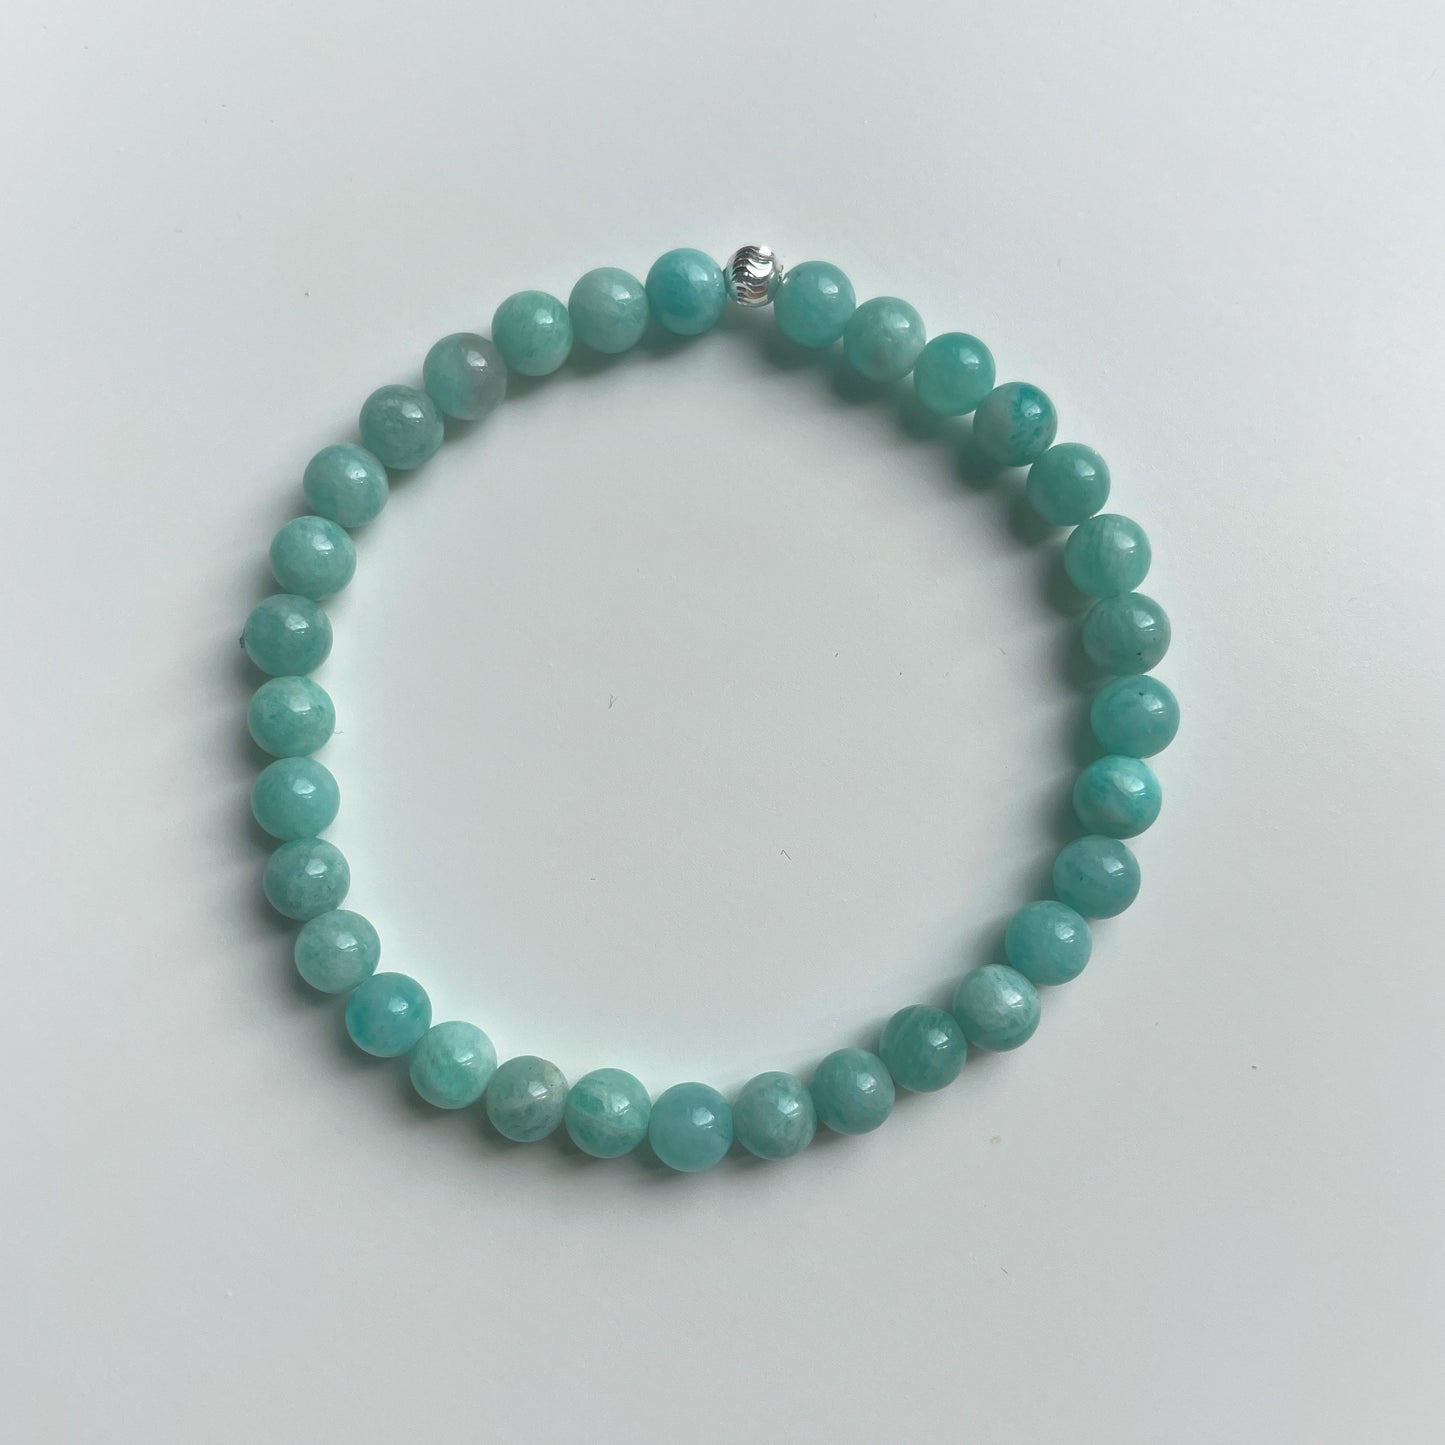 Full Moon - Amazonite bracelet for luck and courage